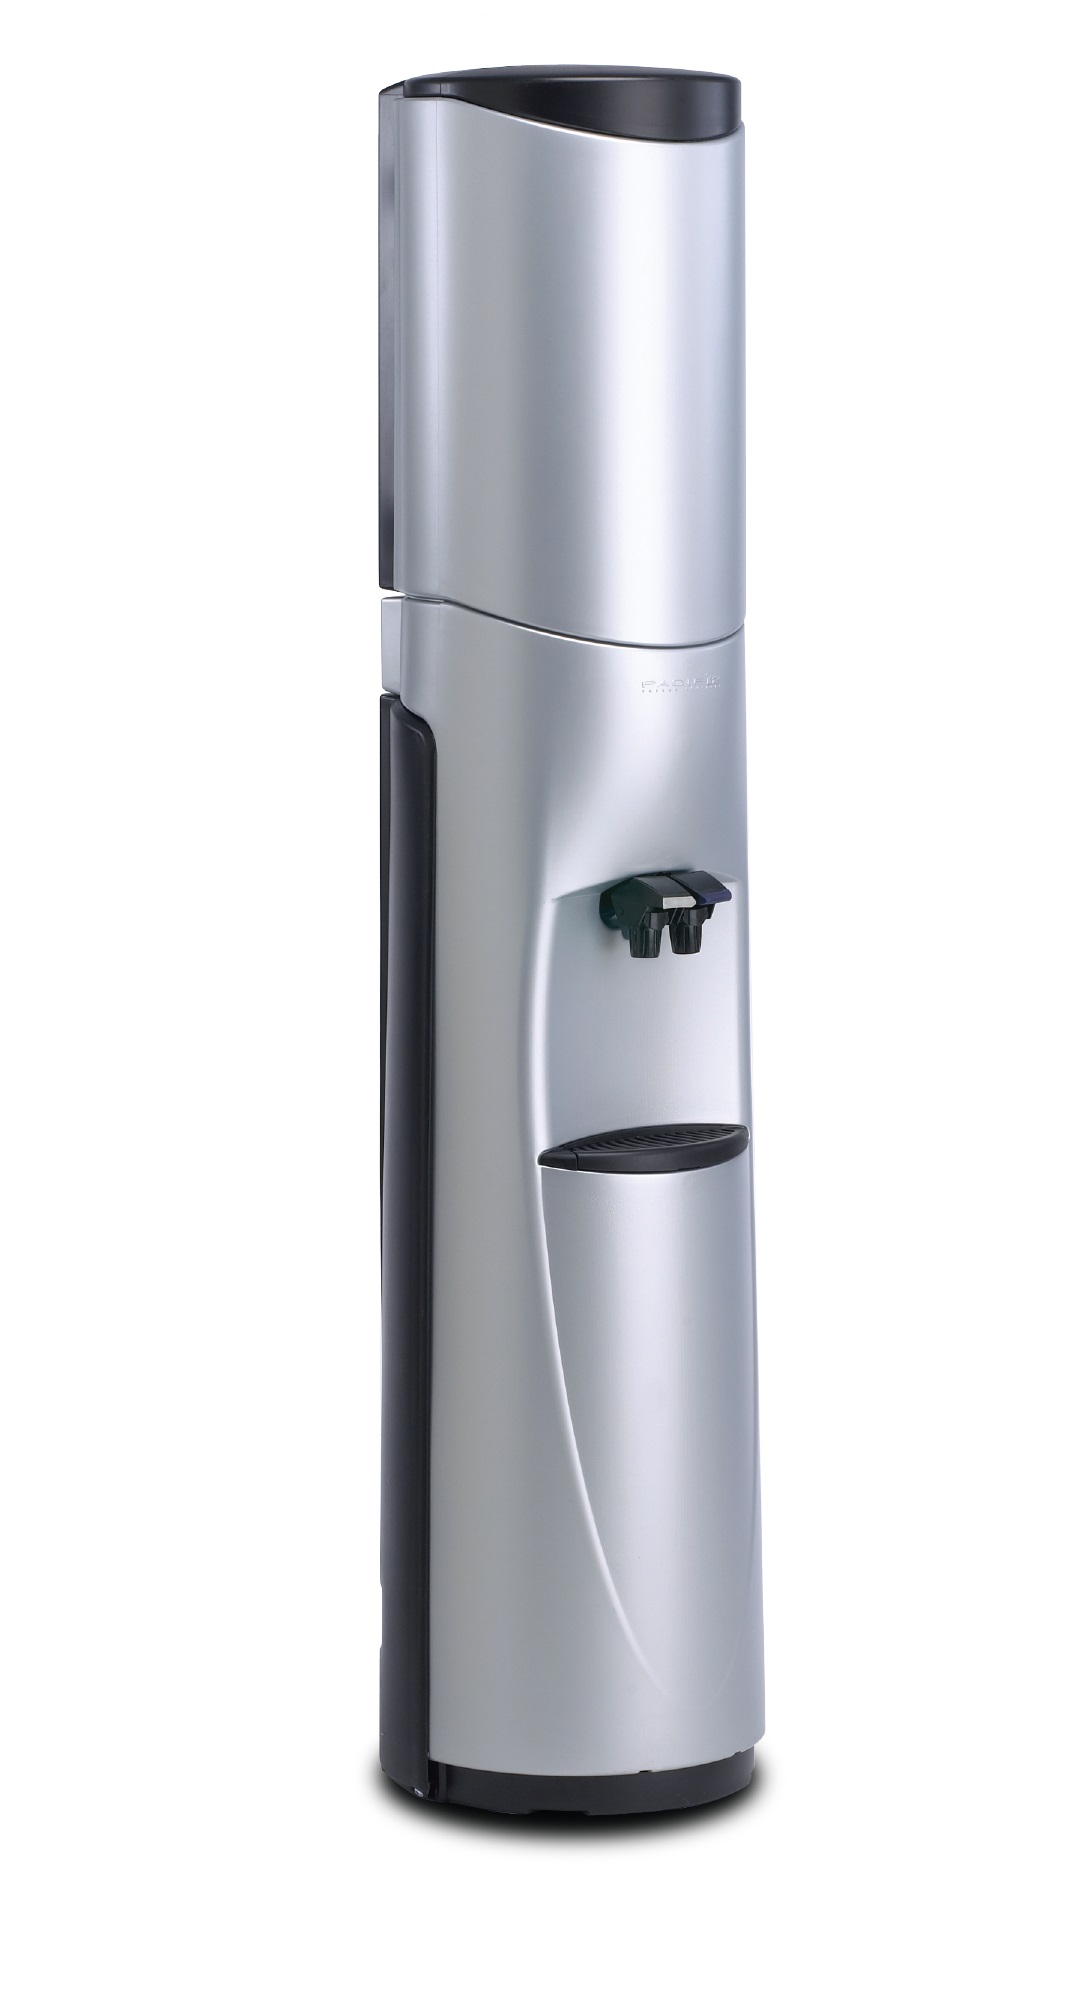 Pacifik Water Cooler - Silver with Black Trim - New technology for a whole new kind of bottled water cooler, Room Temperature & Cold